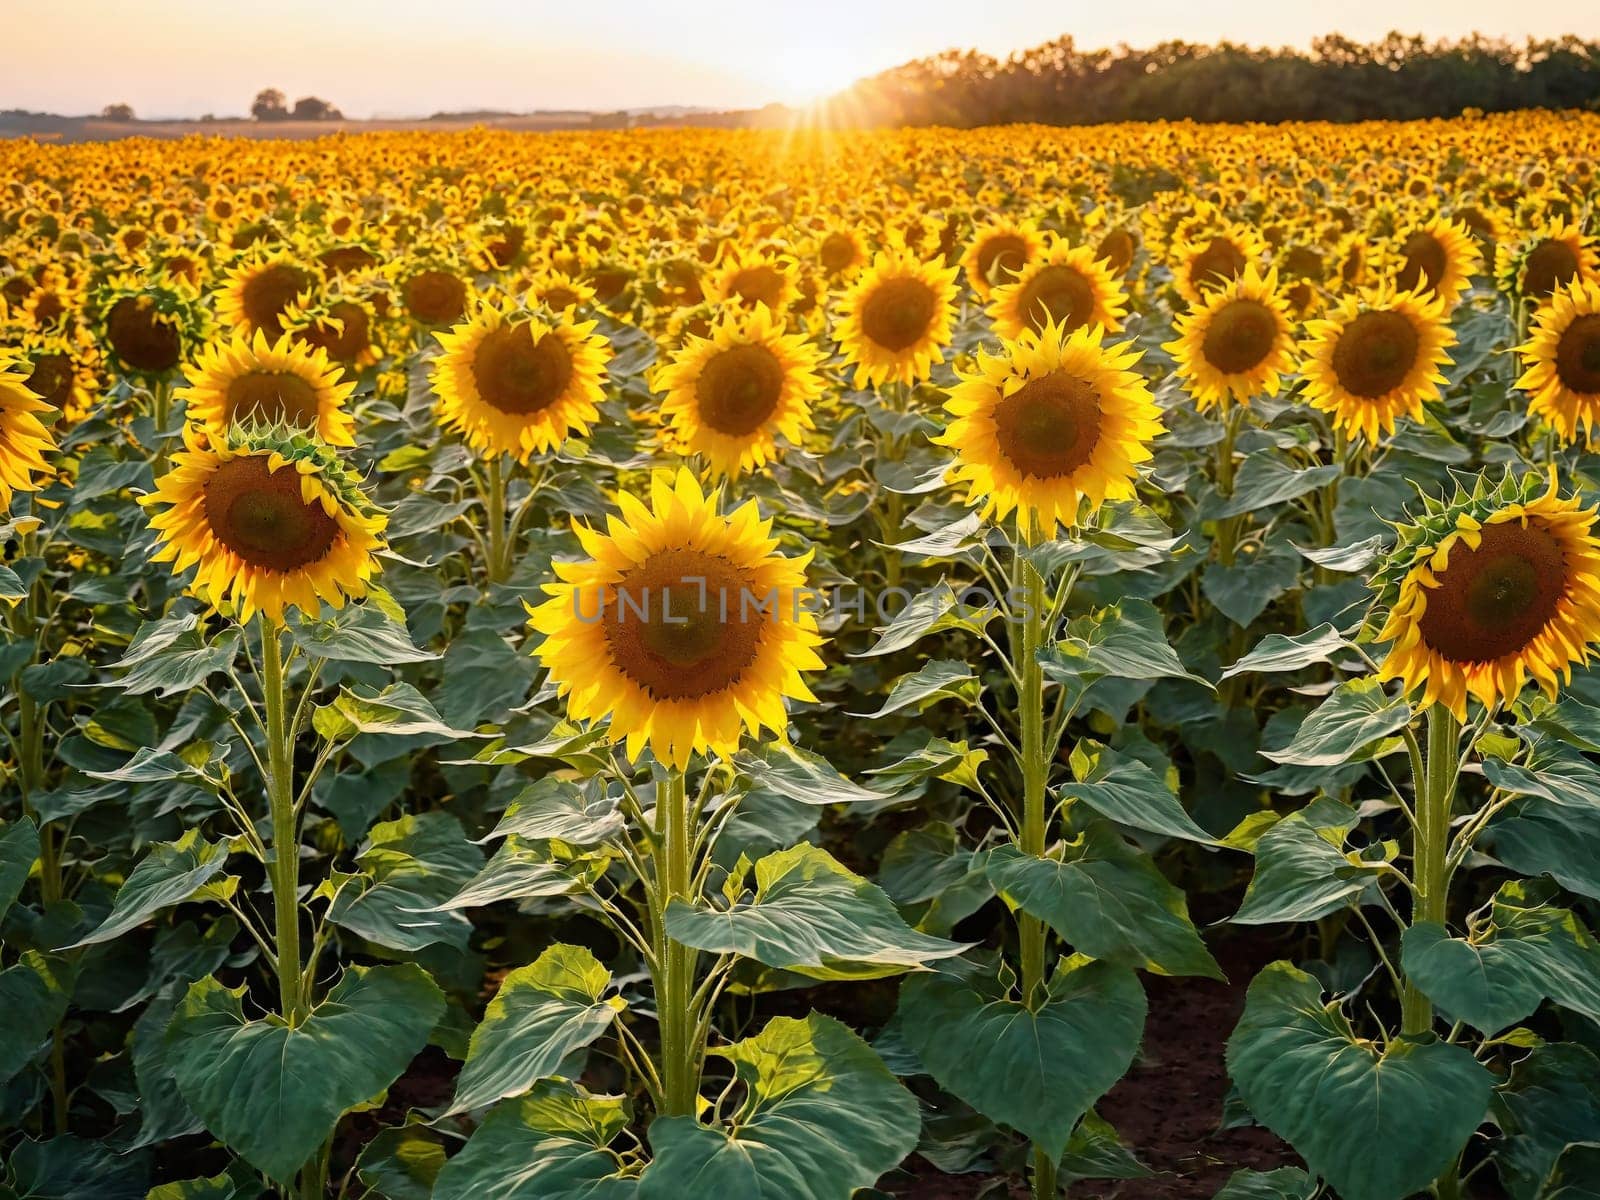 Dense field of sunflowers vibrant yellow petals rich green leaves bright summer sun blue sky by panophotograph